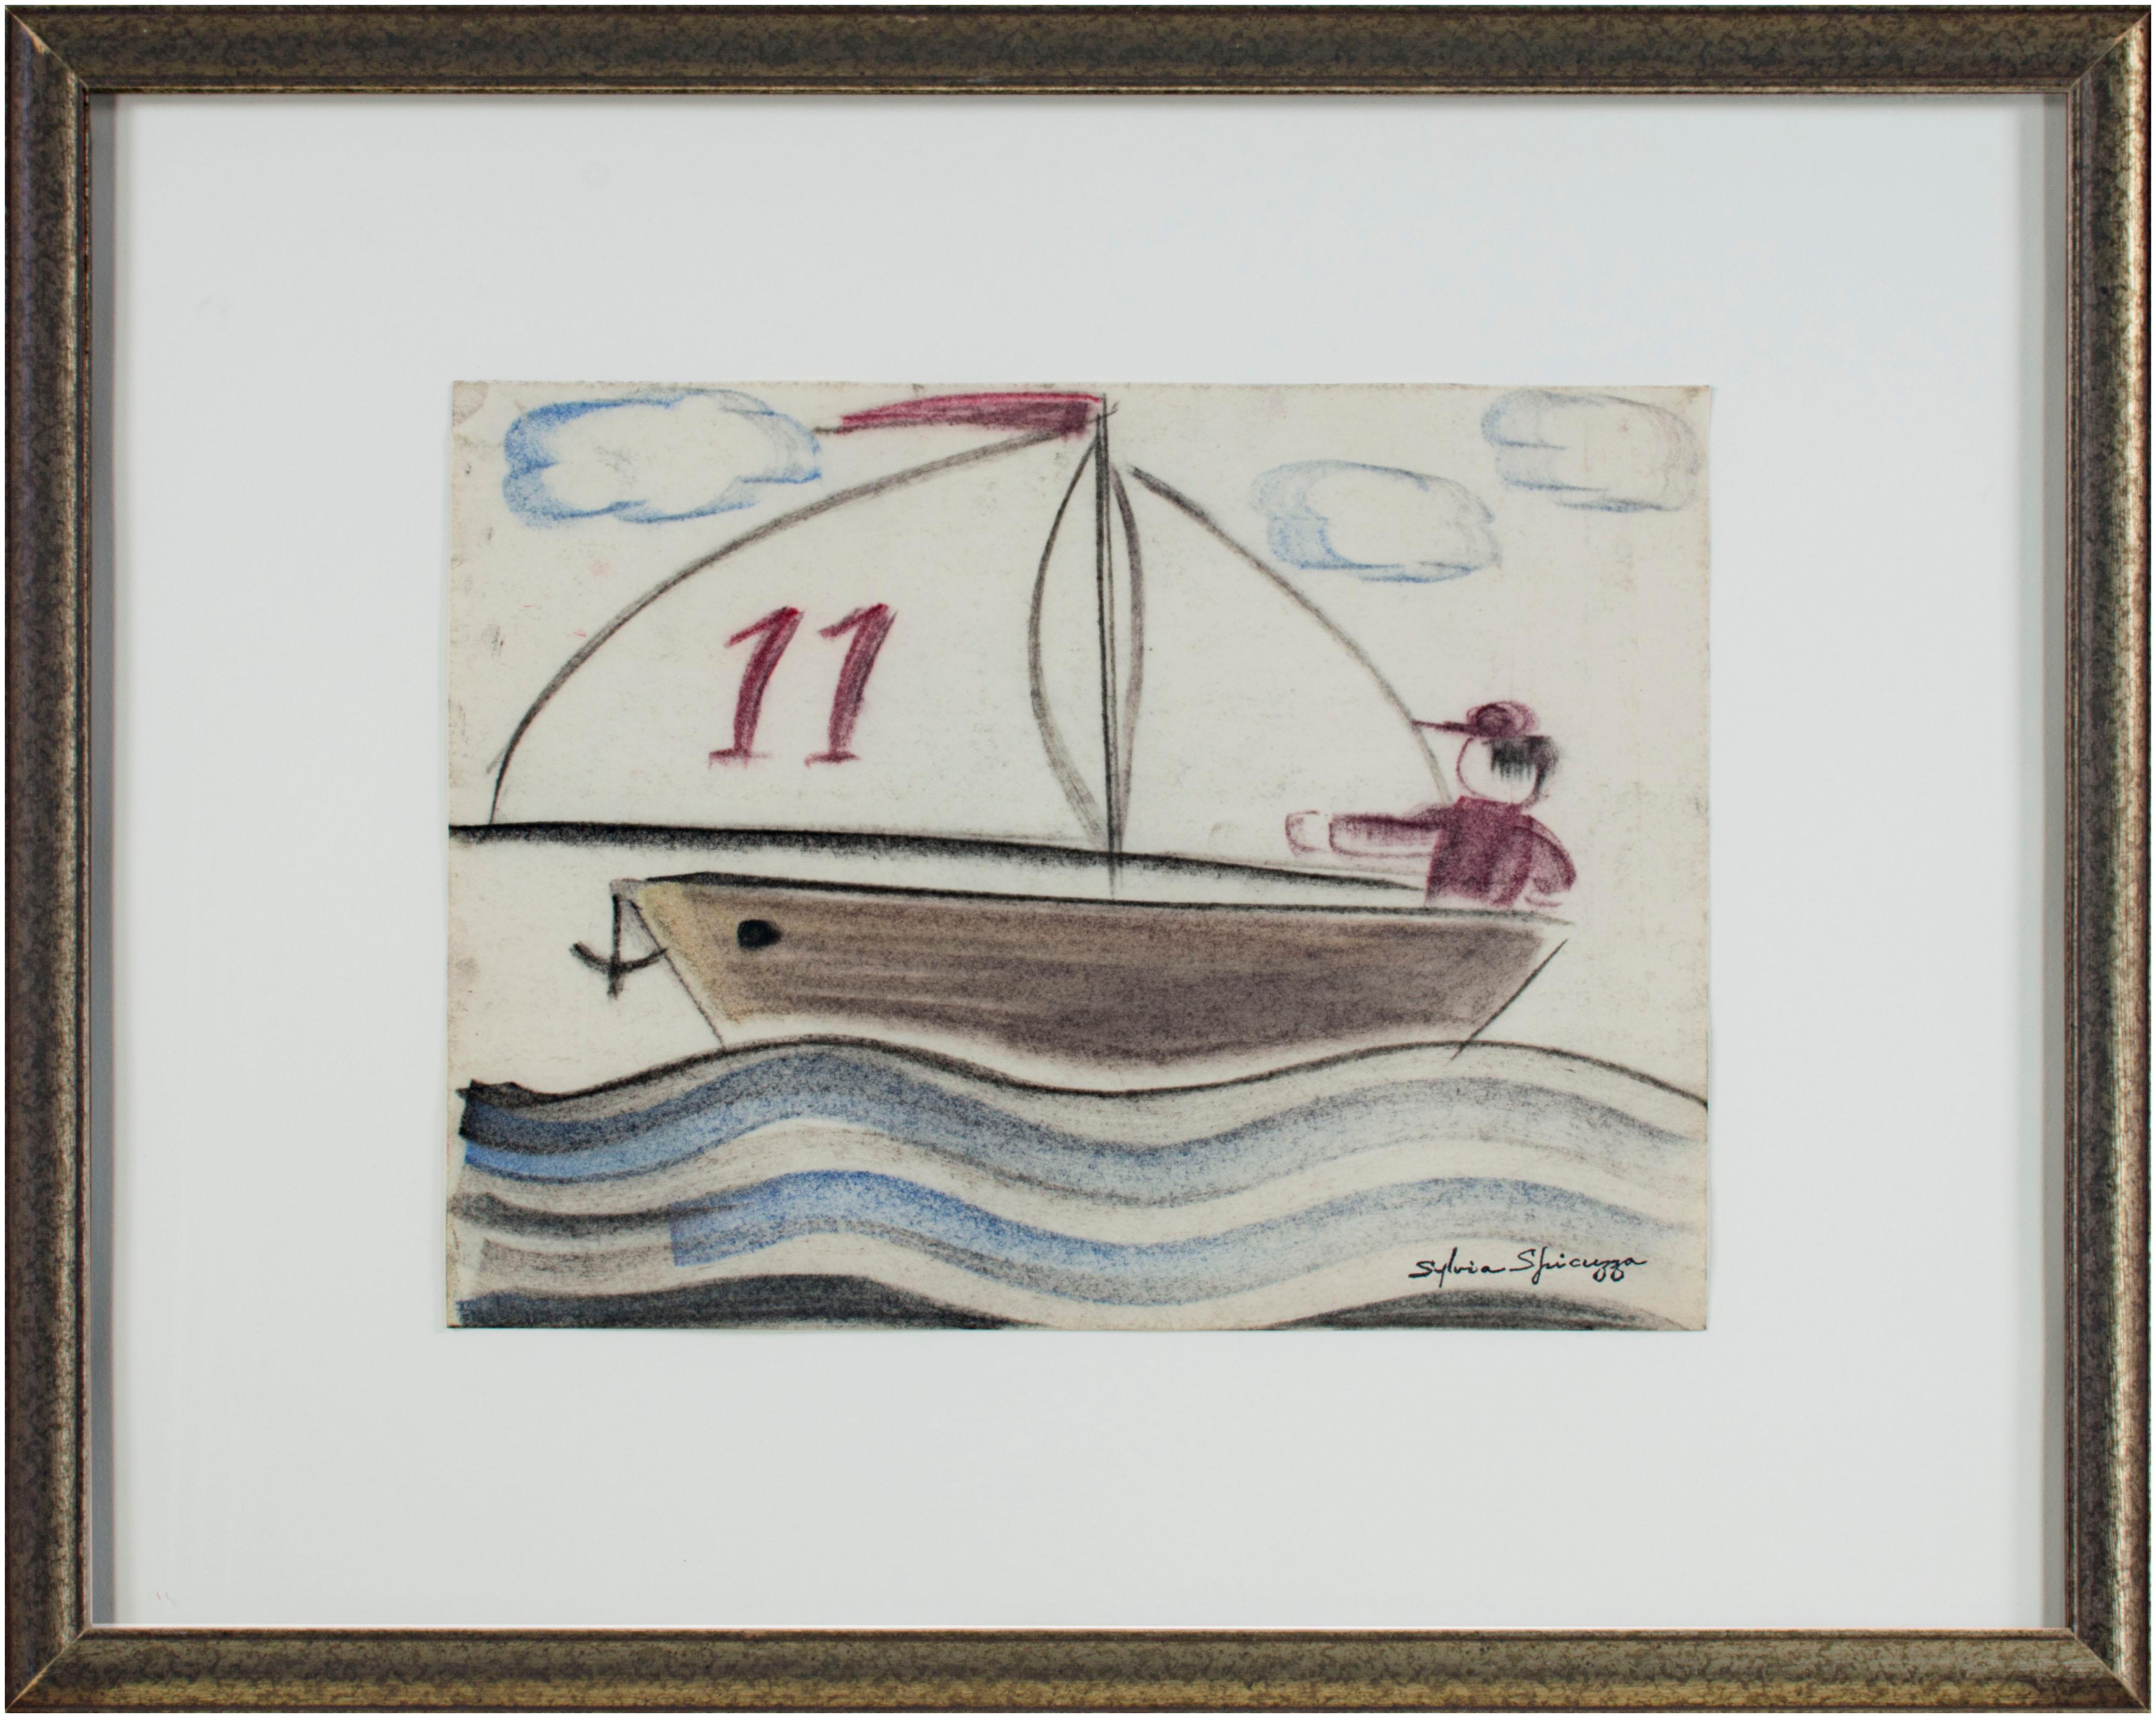 In this image, Sylvia Spicuzza presents the viewer with a child-like drawing, showing a figure manning a sailboat marked with the number eleven on its sails. The waving lines of the water beneath are related to the Art Deco pastel drawings she